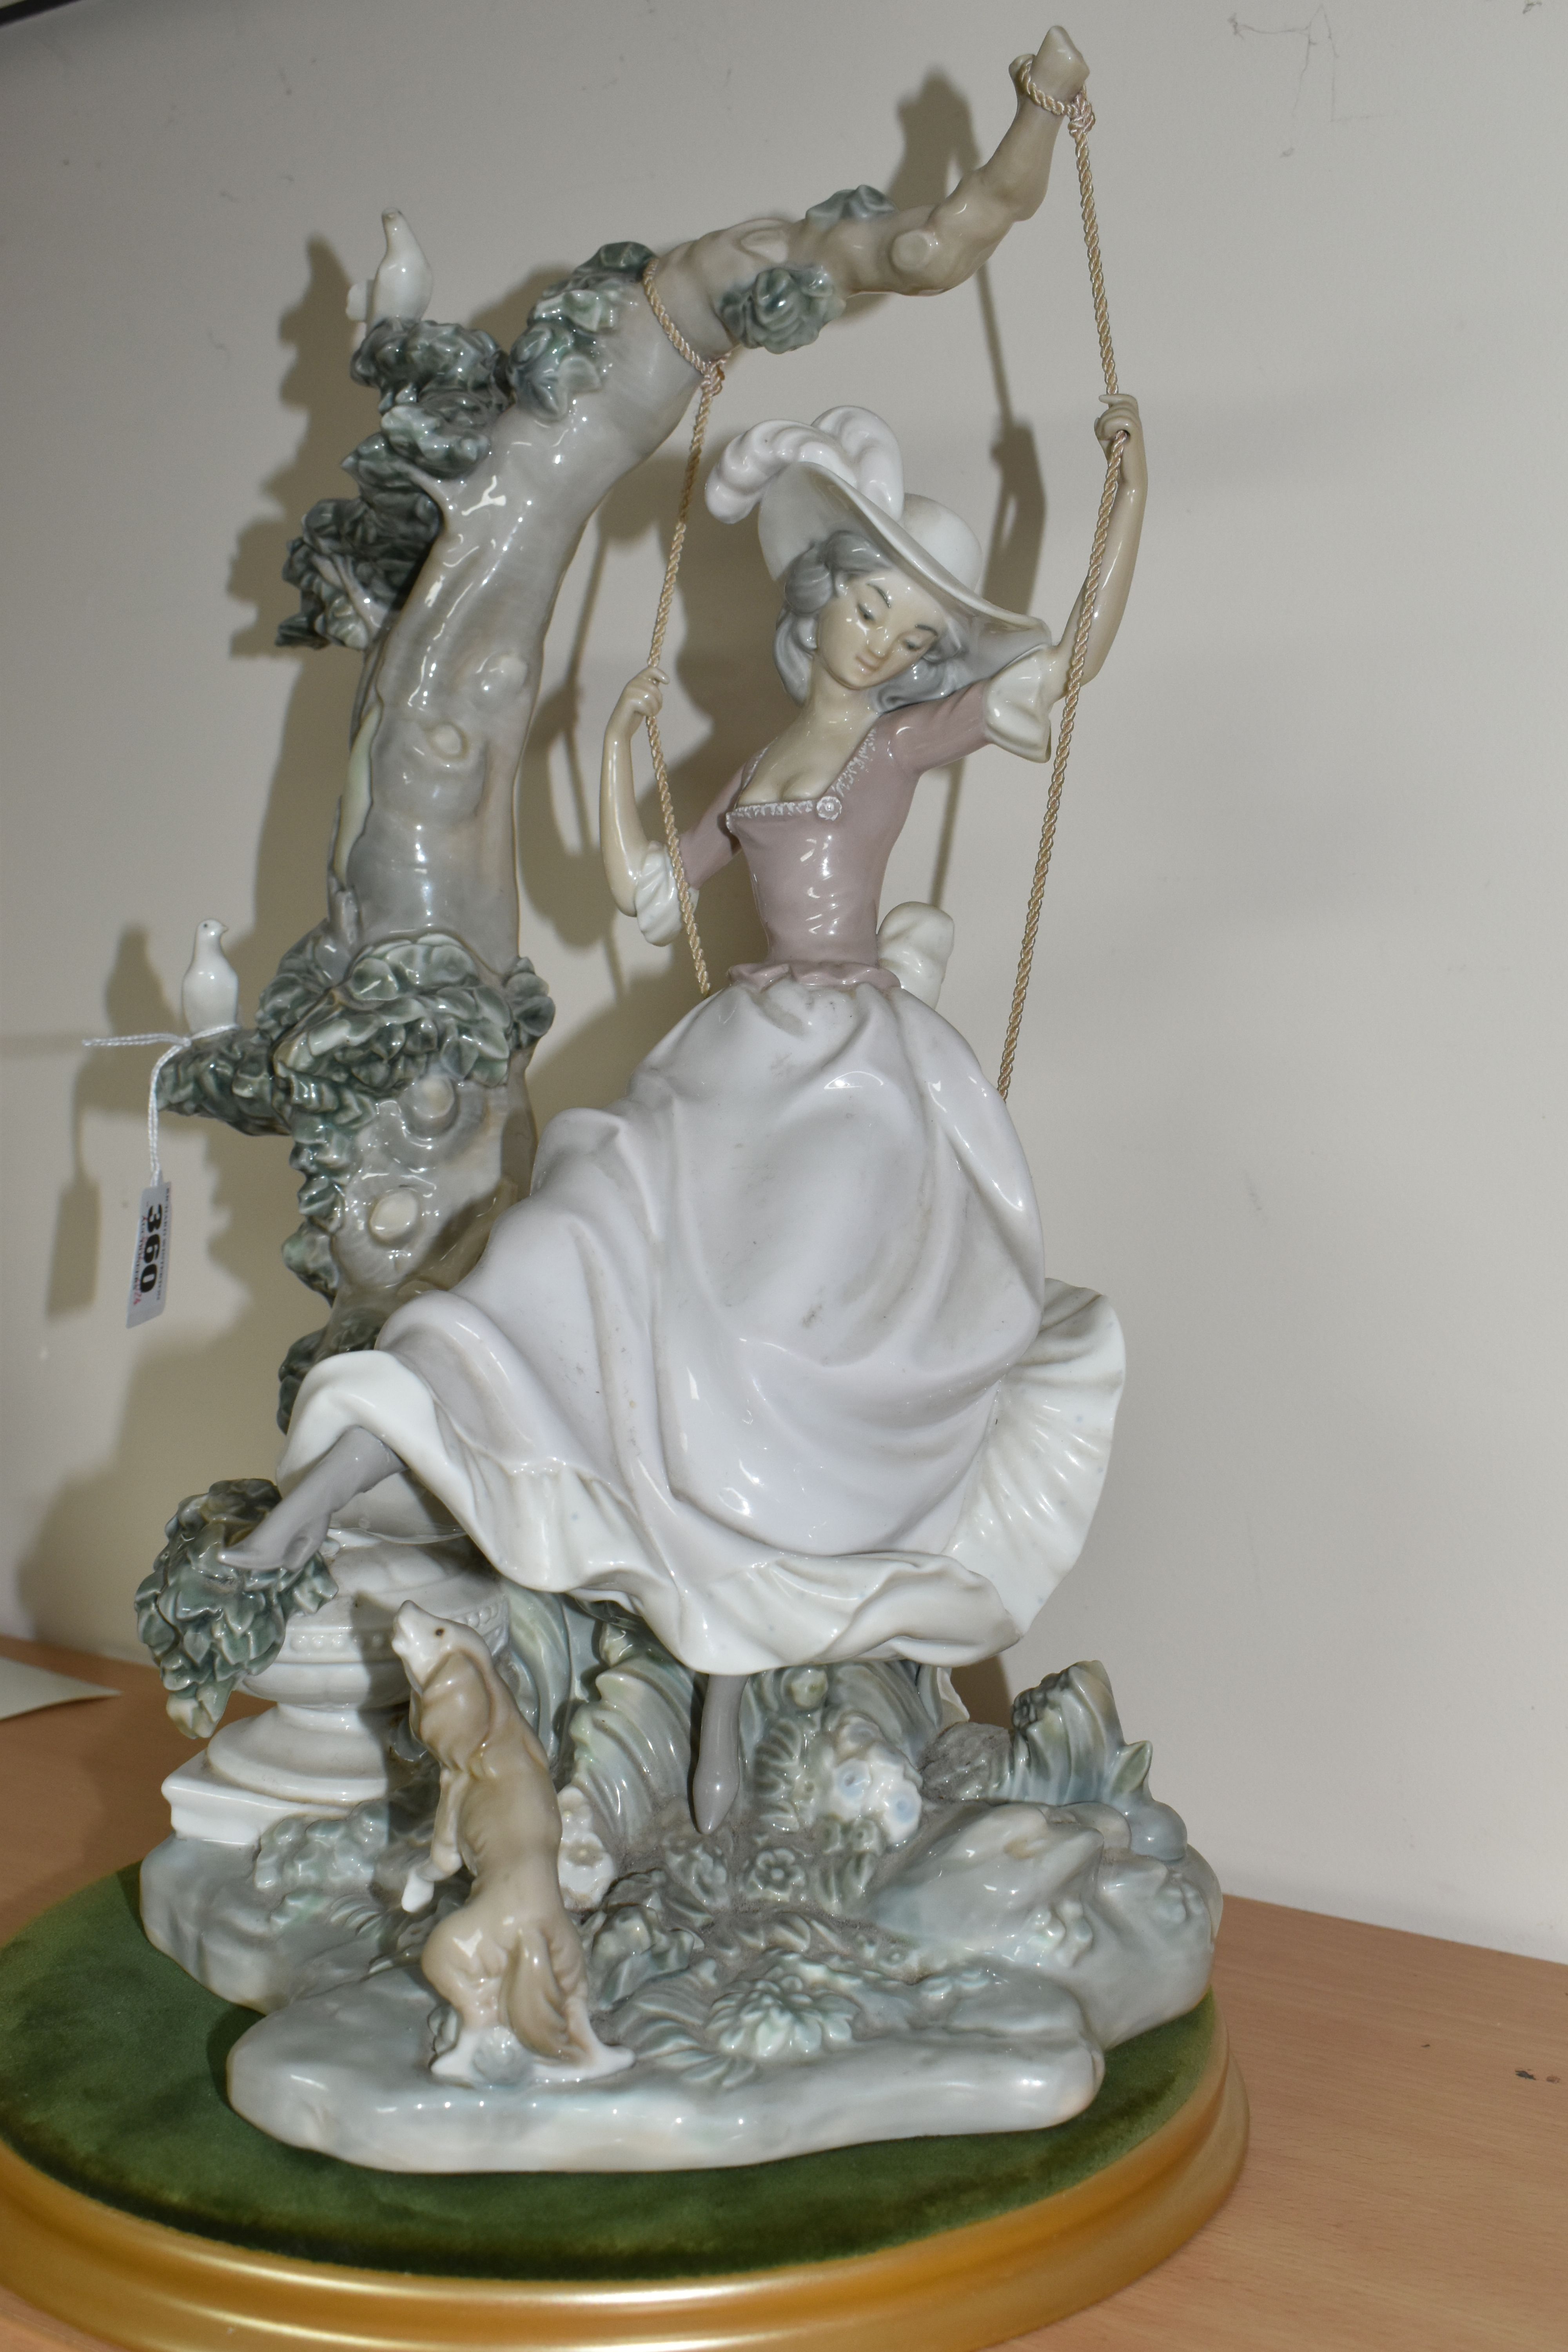 A LLADRO 'SWINGING' SCULPTURE OF A GIRL ON A SWING, model no 1297, sculptor Salvador Debon, issued - Image 2 of 7